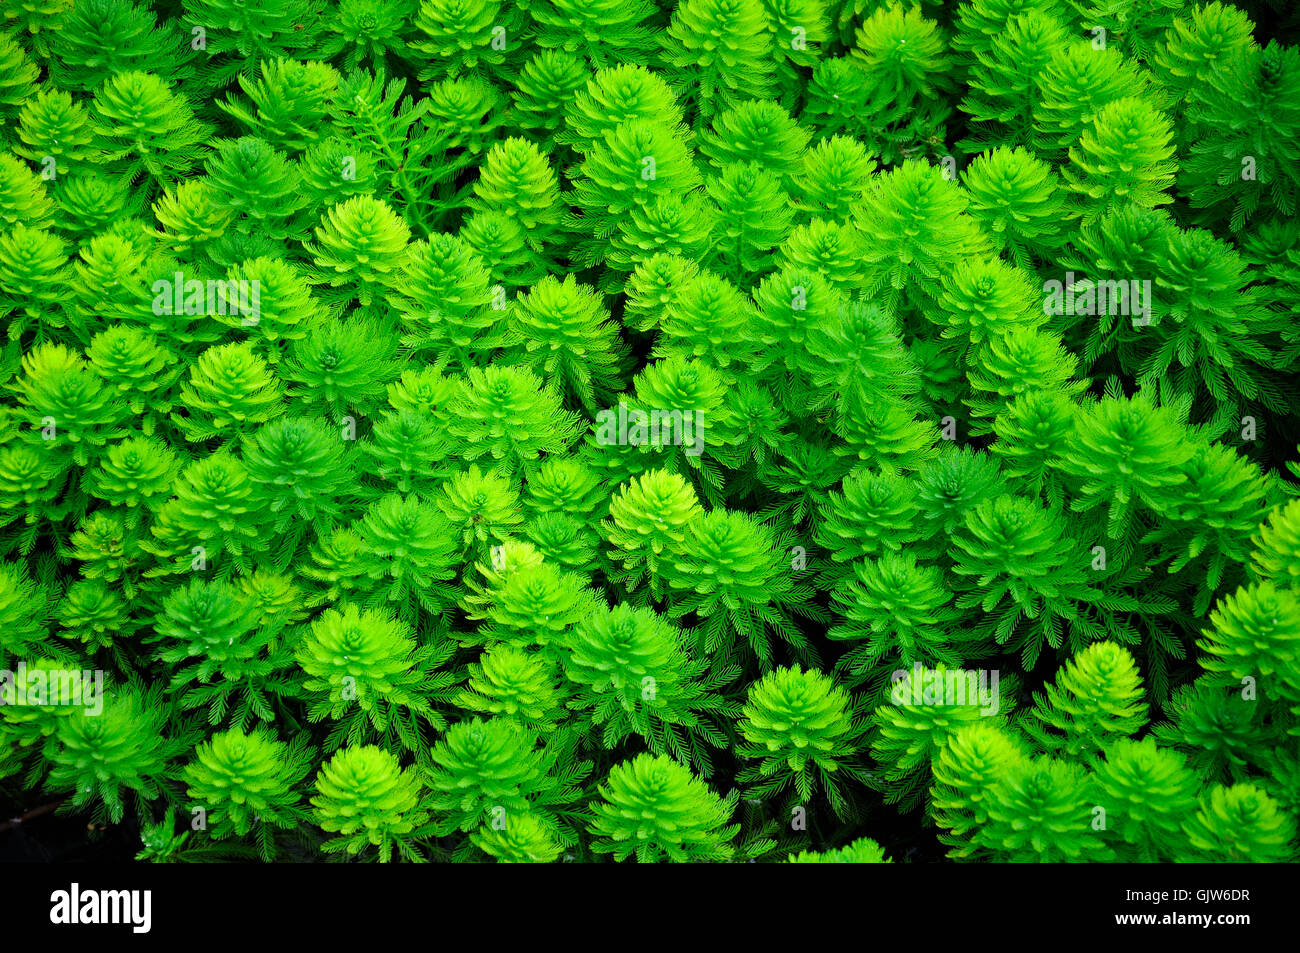 Myriophyllum aquaticum or water milfoil found in the waters of Xitang water town Zhejiang Province china. Stock Photo